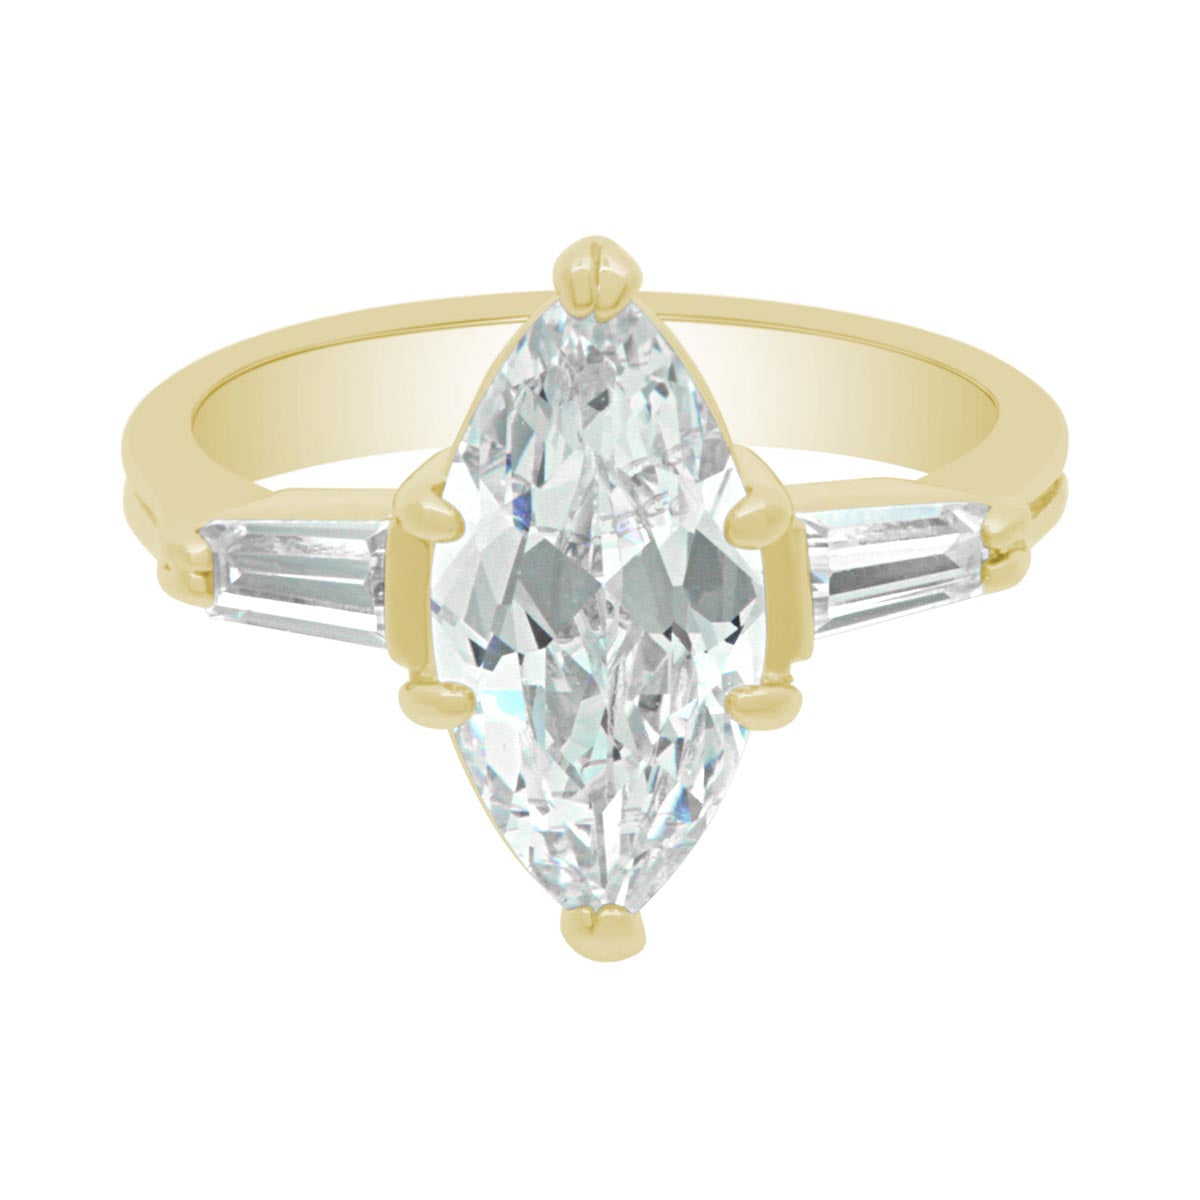 Marquise with Baguettes Diamond Ring in yellow gold